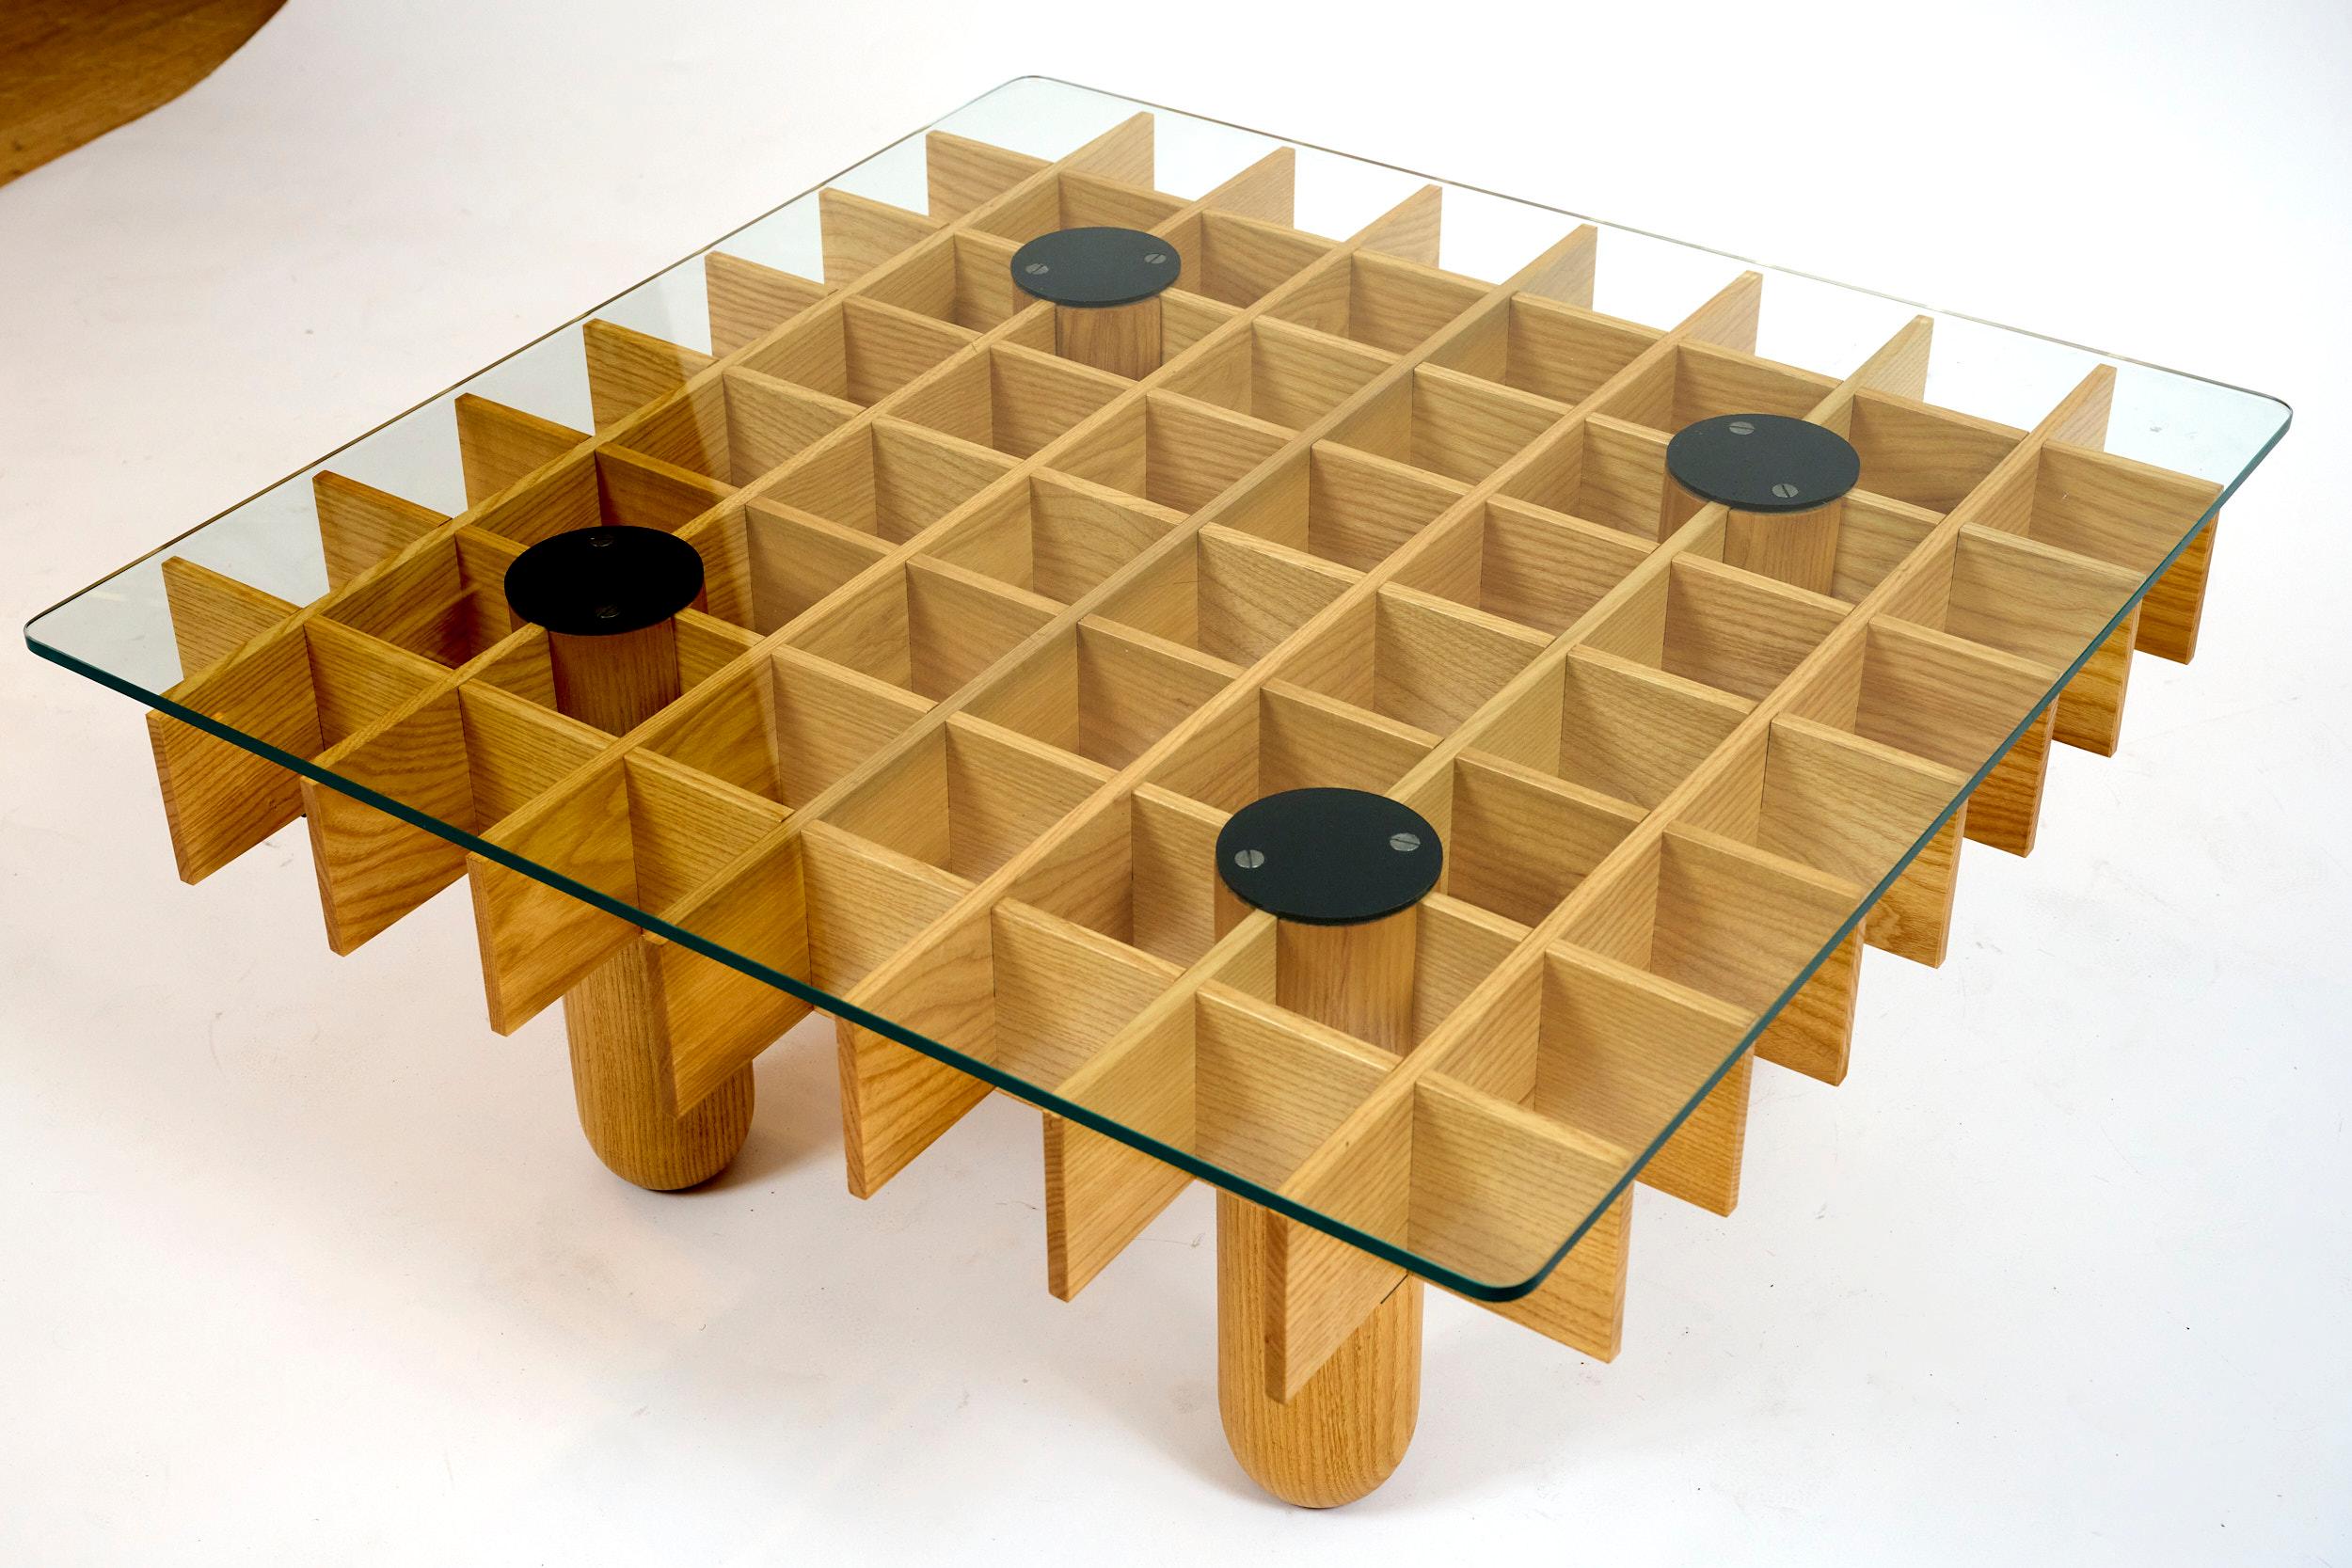 Square coffee table Gian Franco Frattini

Made in small numbers by cabinet maker Pierluigi Ghianda and distributed by Knoll International.

Ash, glass and laquered steel

Table is easily dismantled for shipping.

